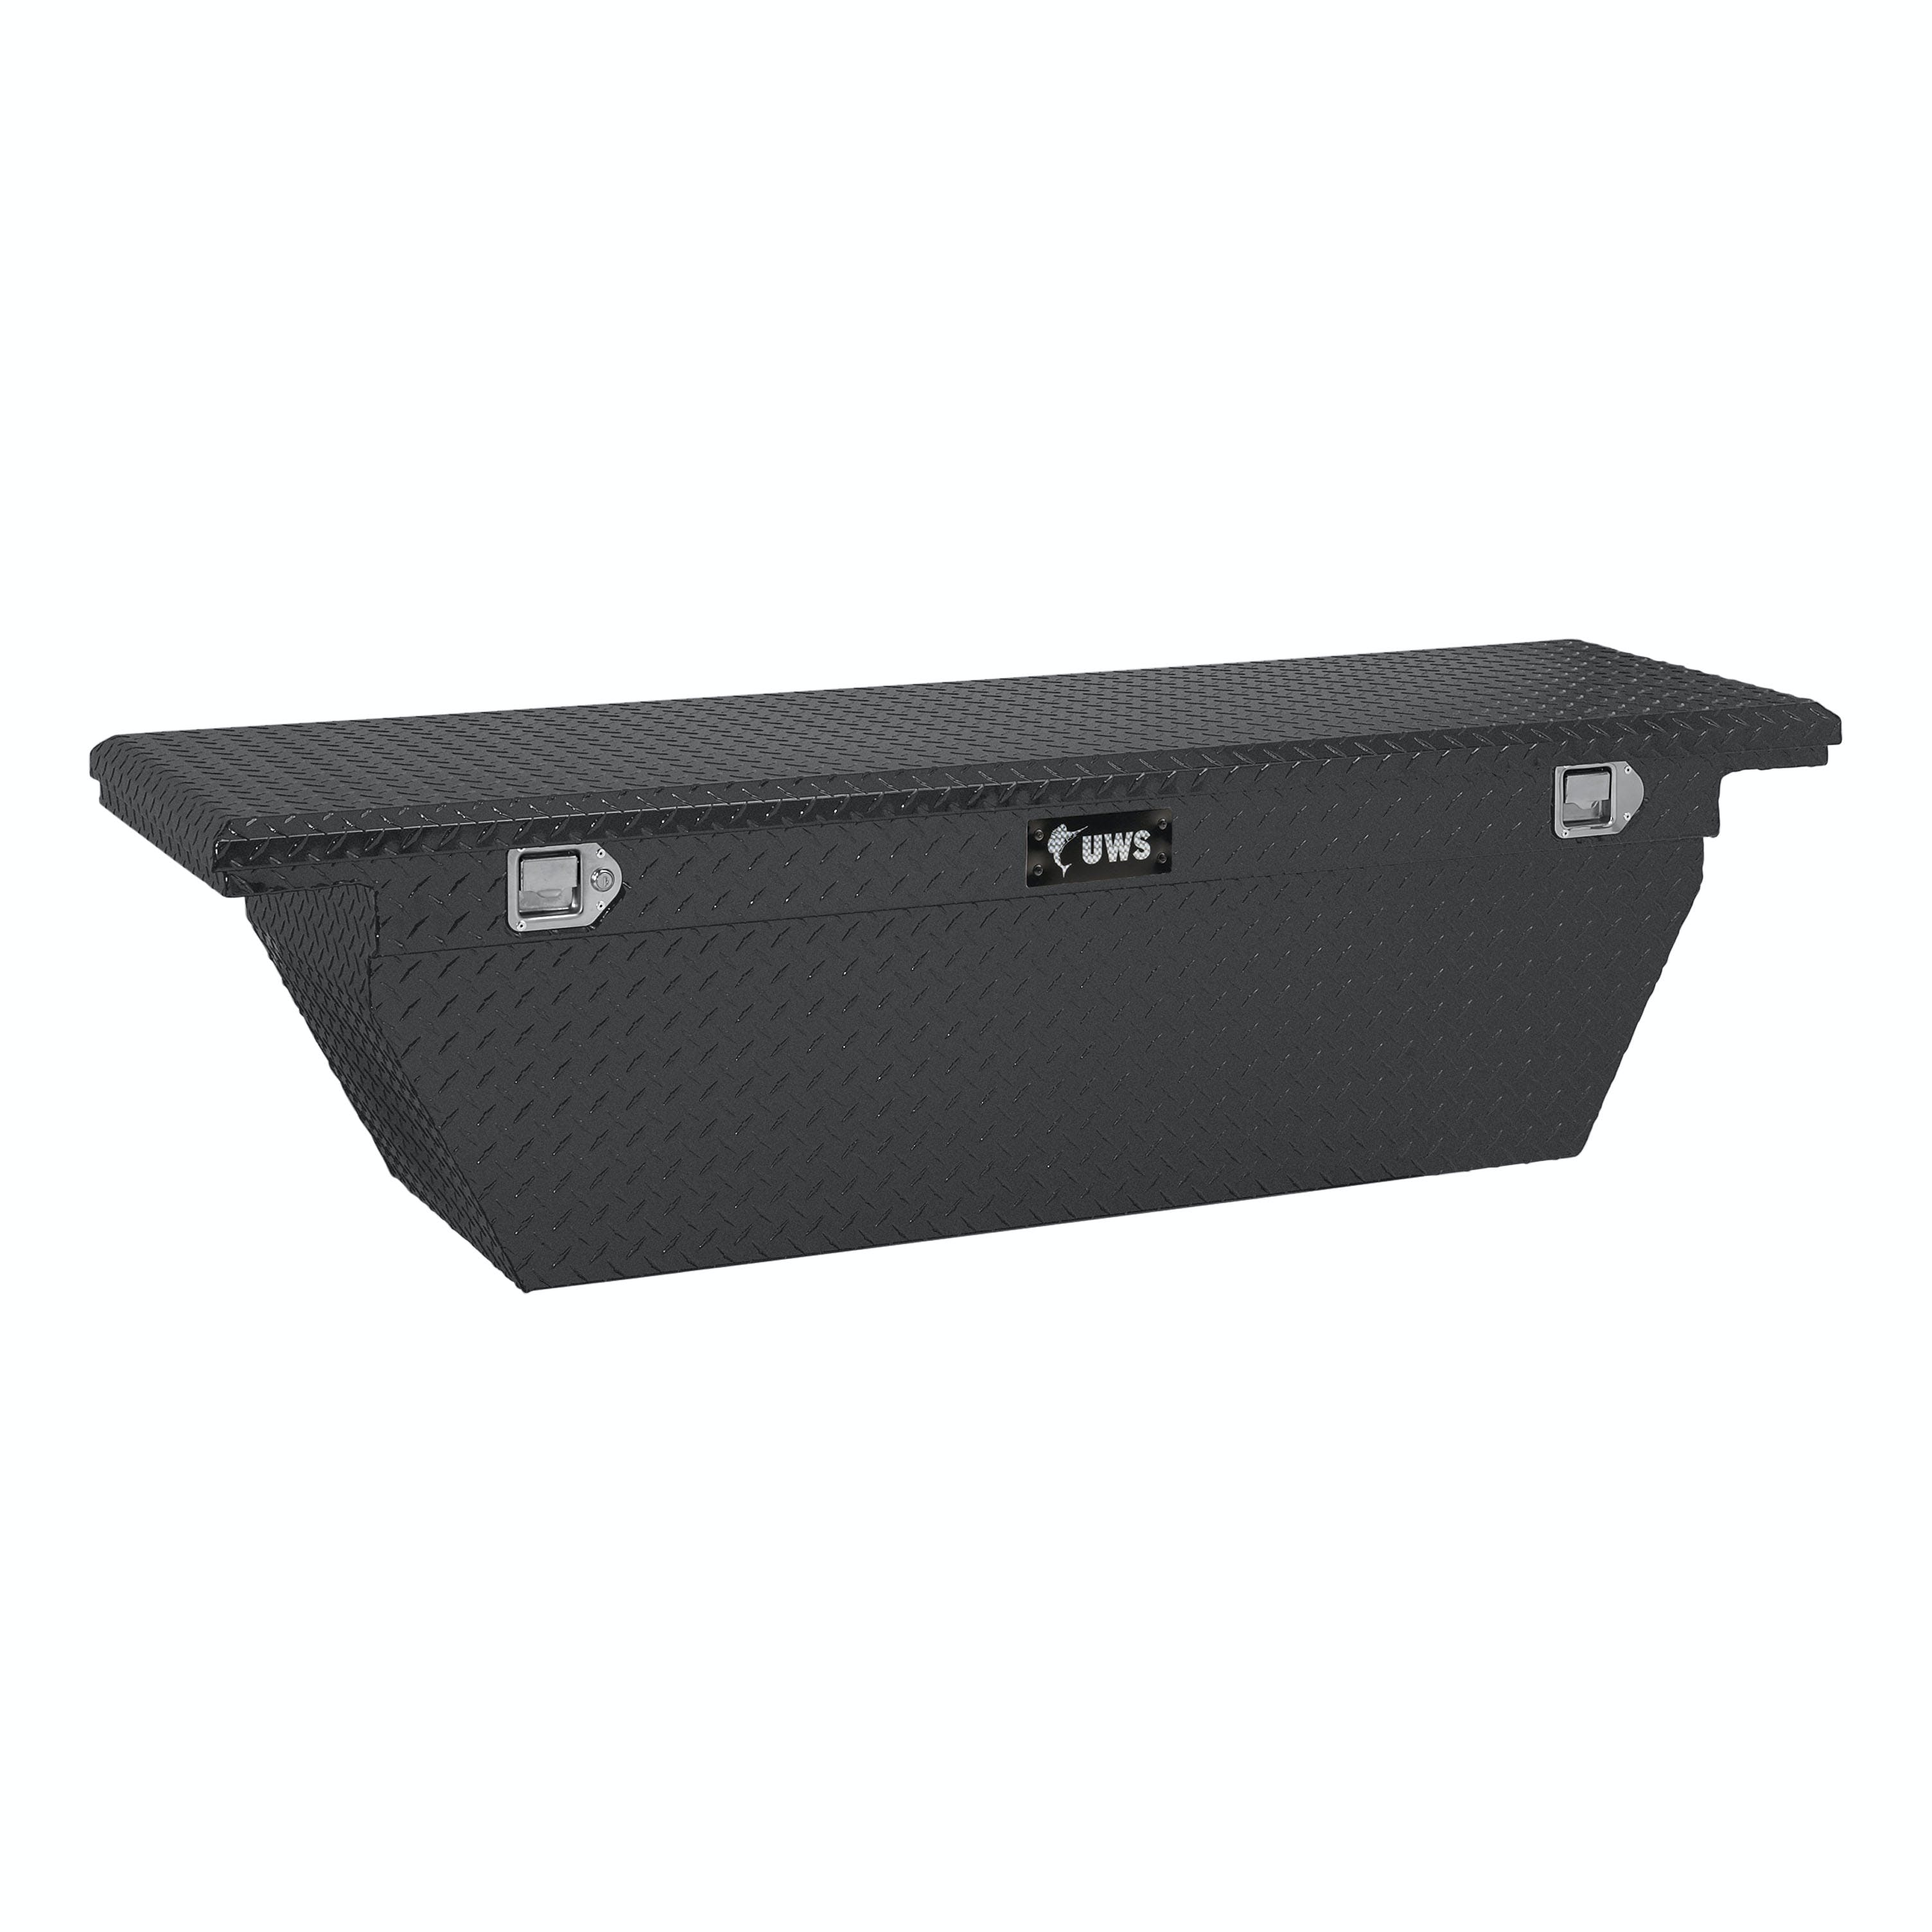 UWS TBSD-69-A-LP-MB 69 inch Aluminum Single Lid Crossover Toolbox Deep Low Profile Angled Matte Black